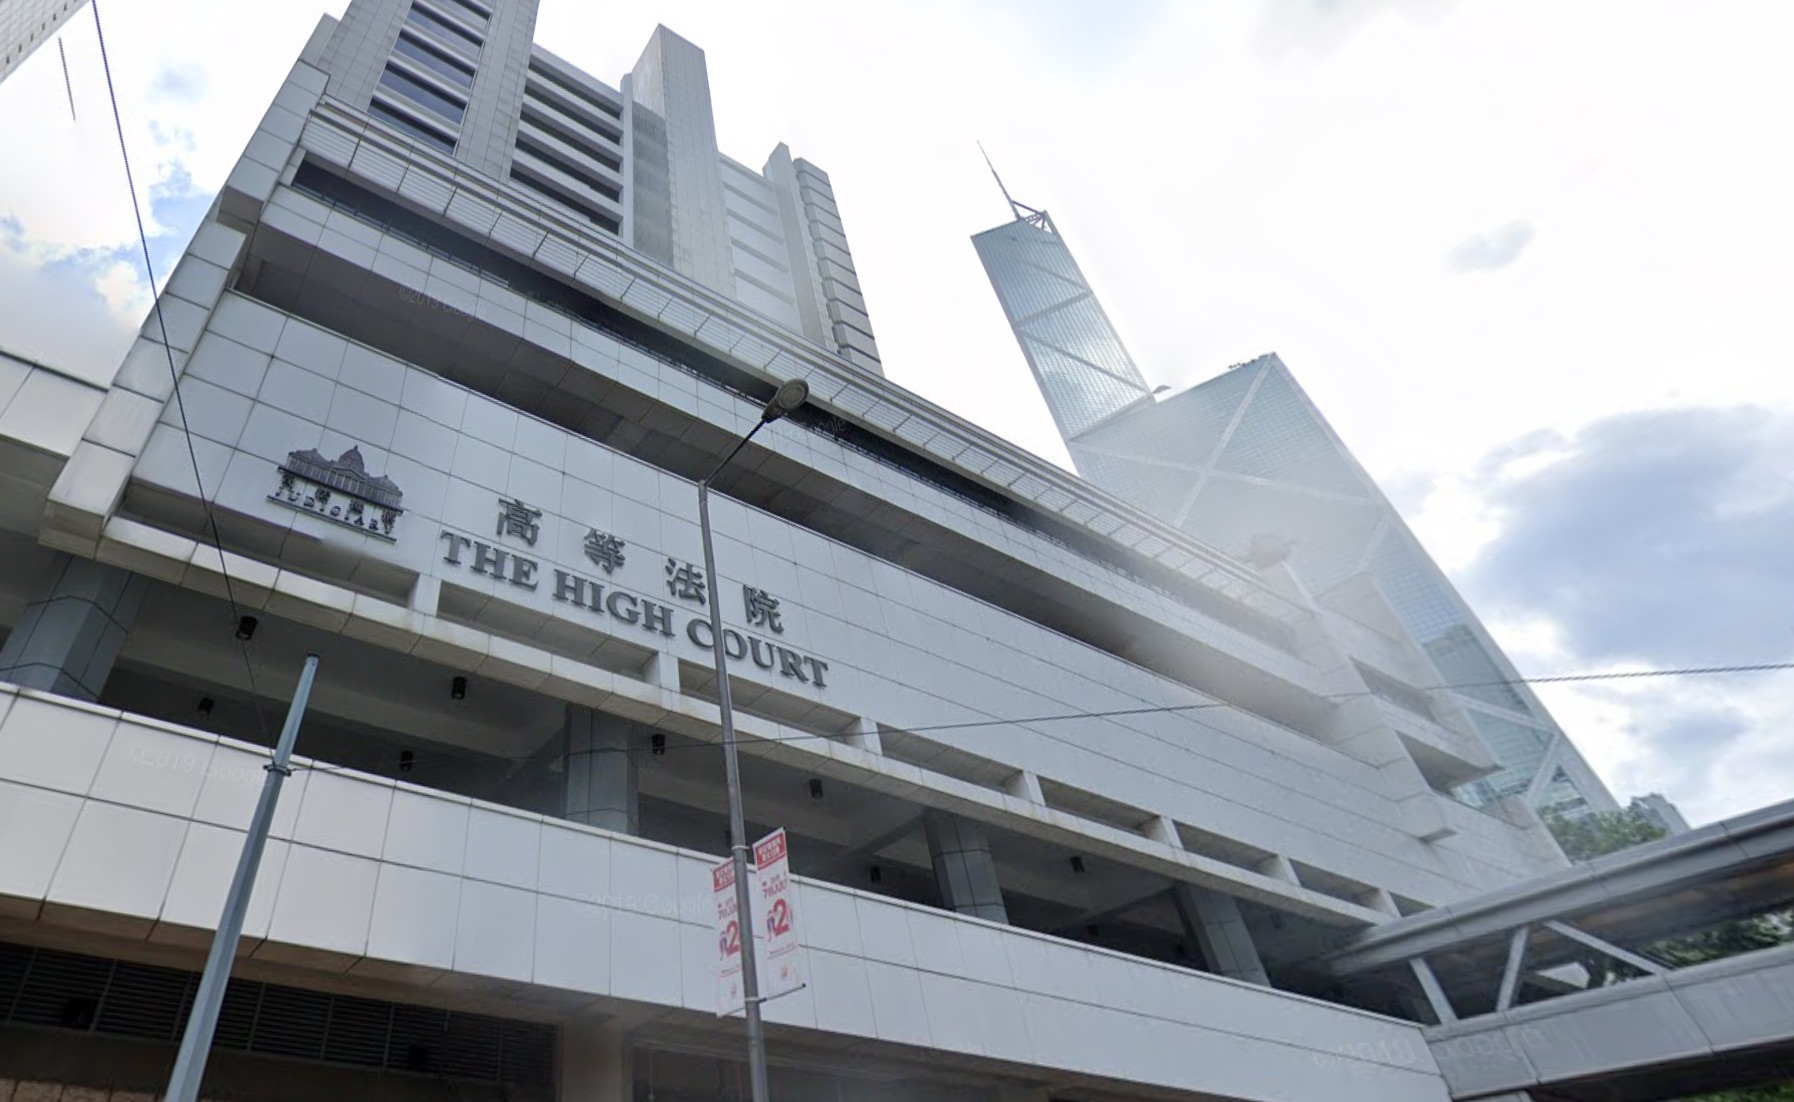 The exterior of the High Court in Admiralty. Photo via Google Maps.